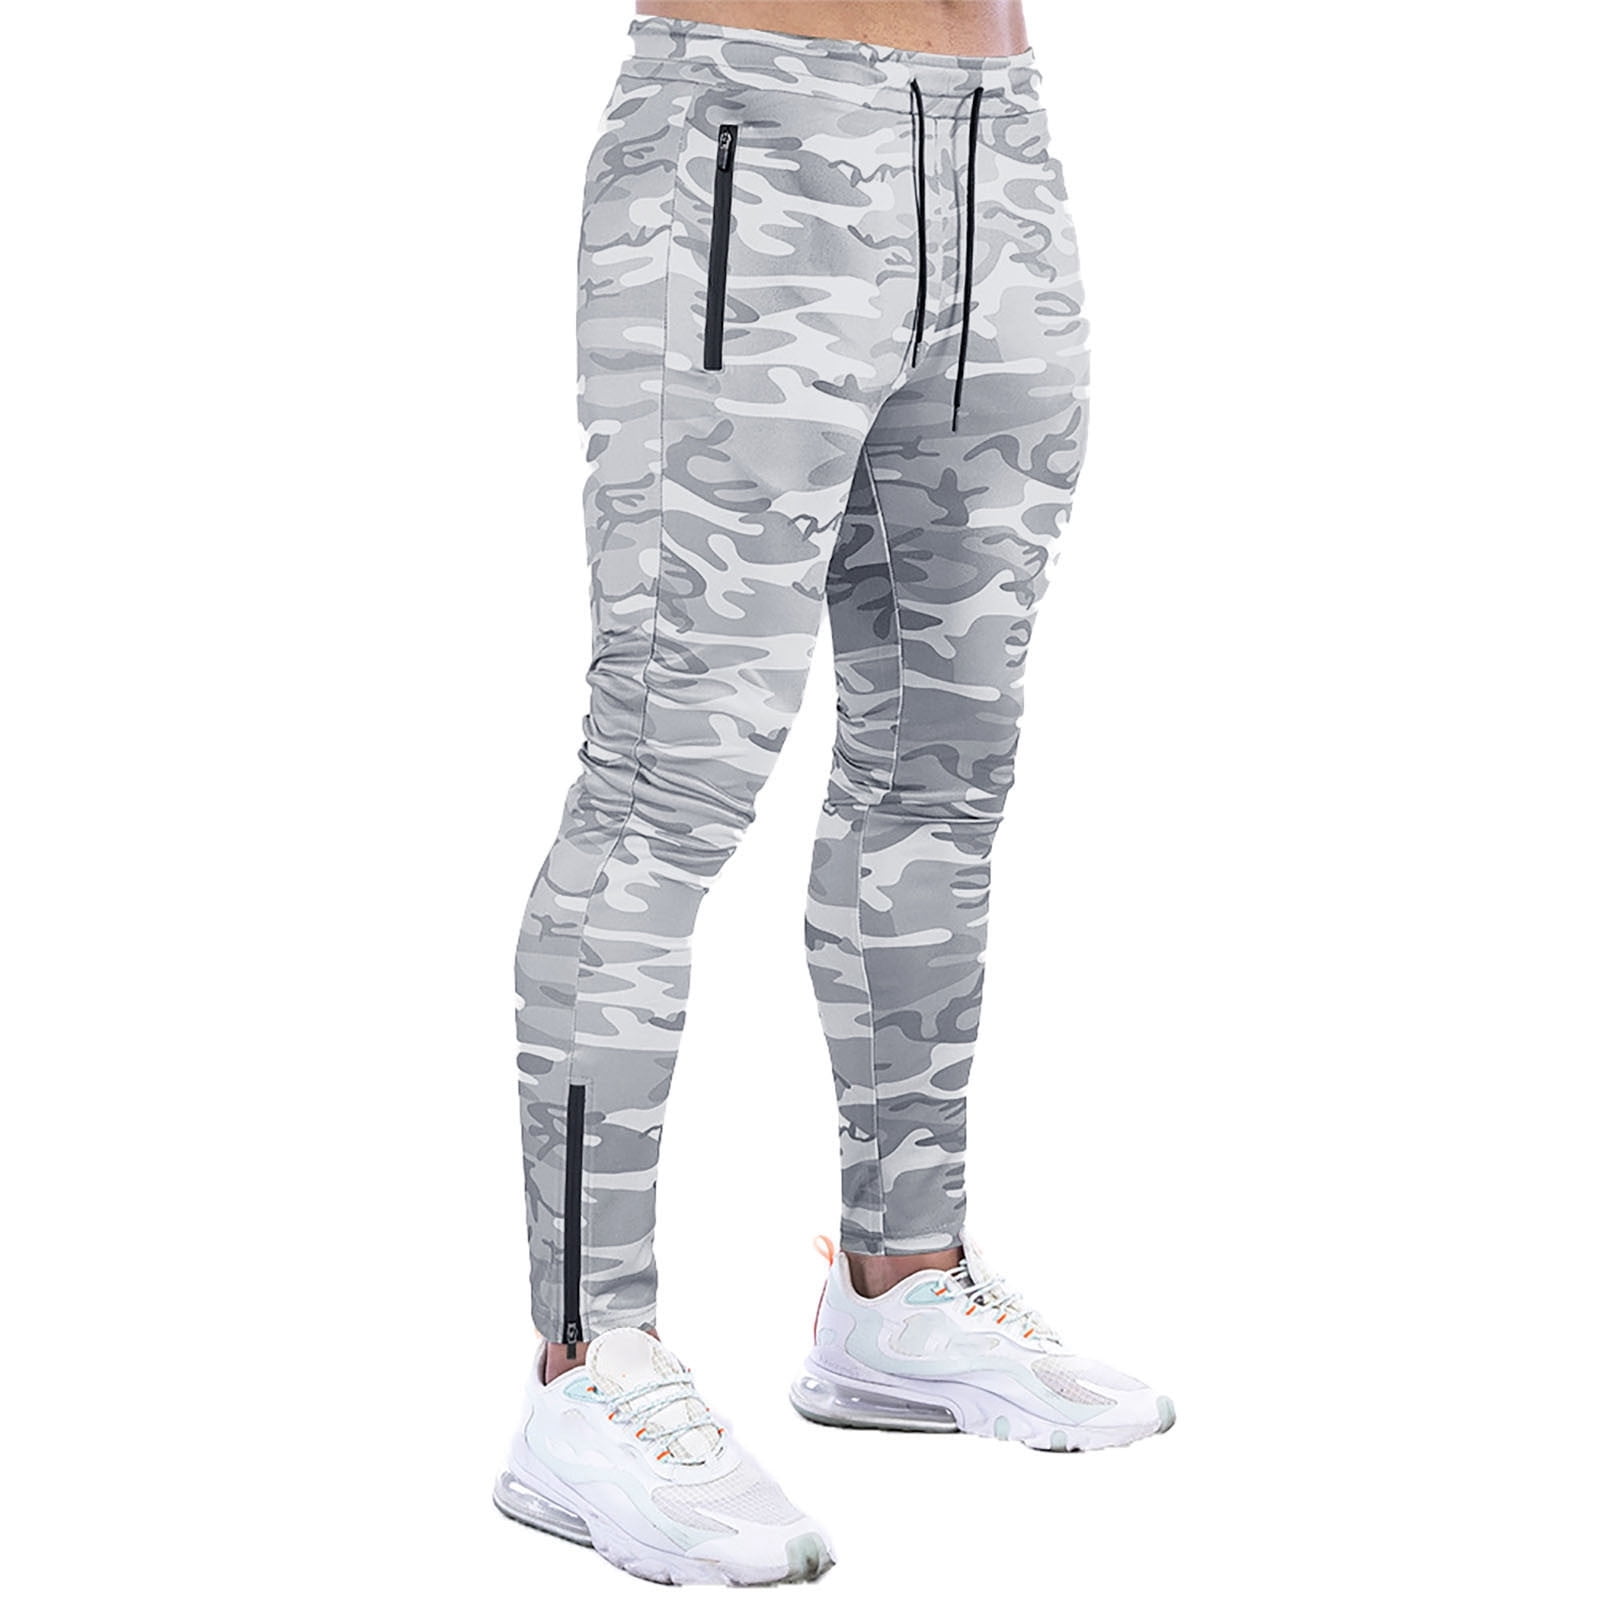 8QIDA Men's Sport Workout Jogging Pants with Zipper Pocket and Pull ...